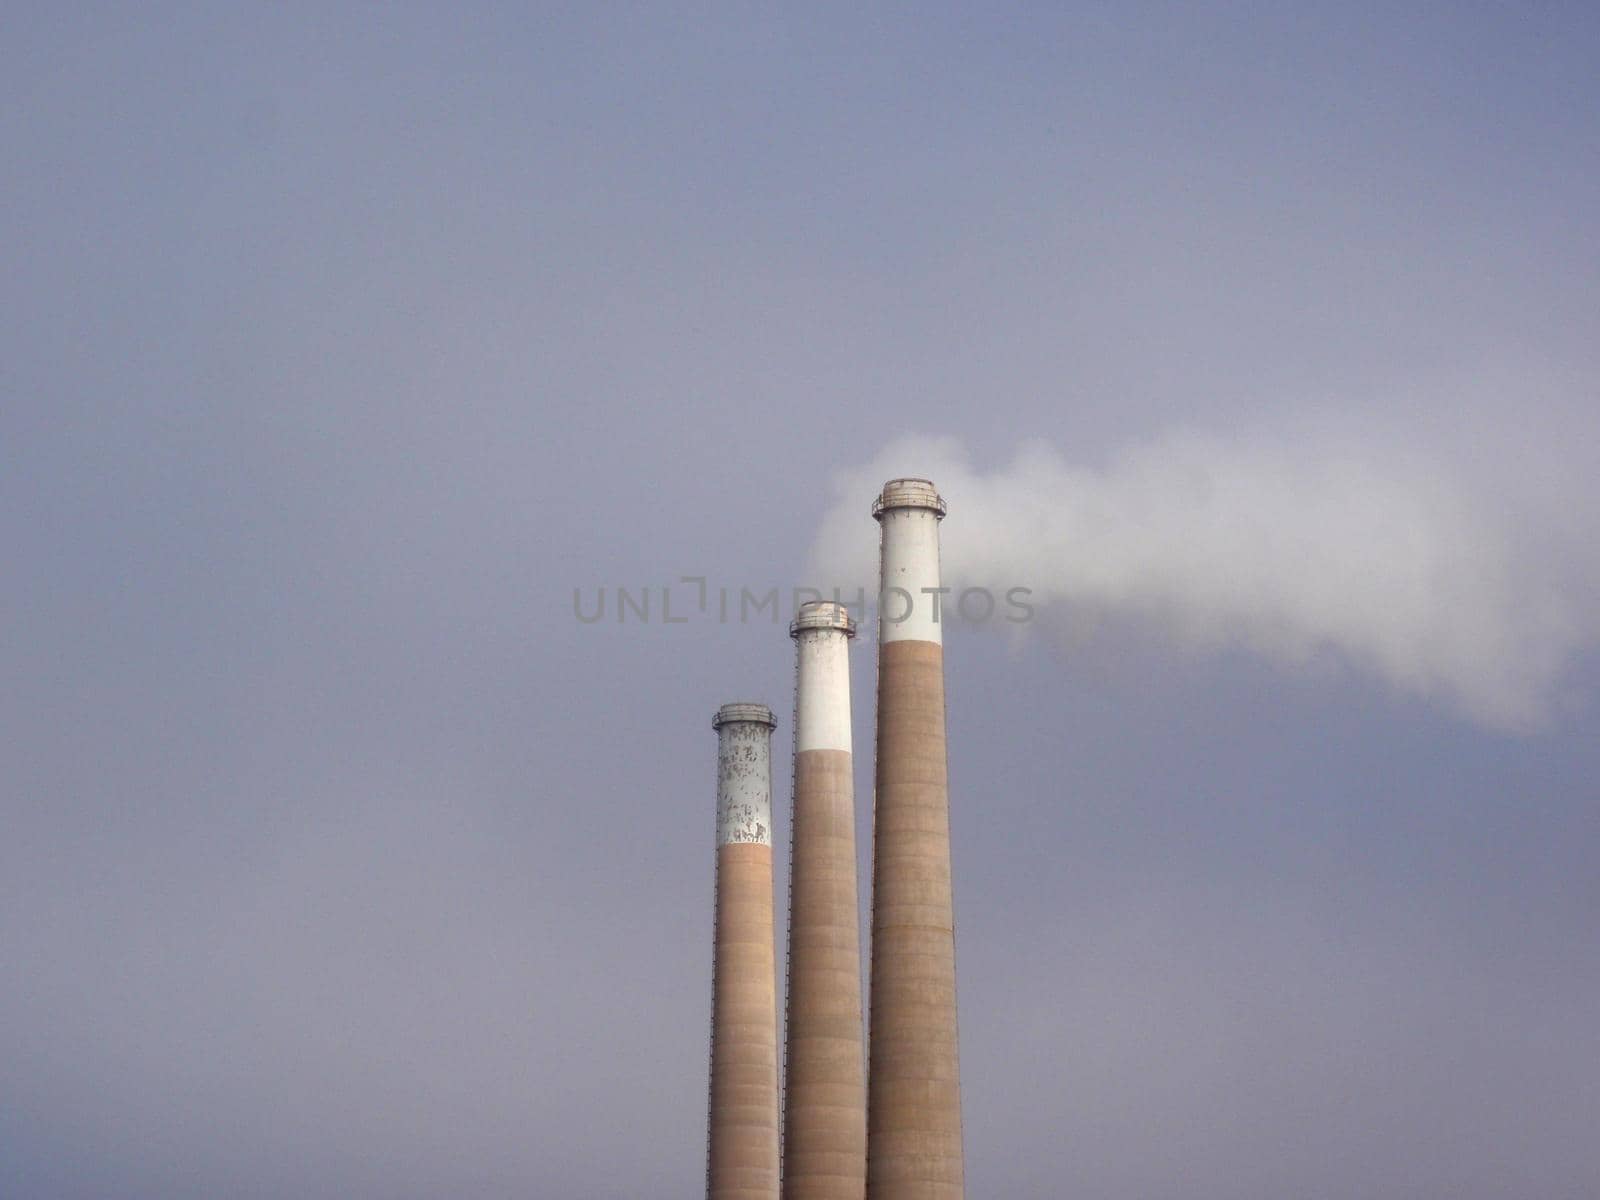 Three Smokestacks put pollution into the air by EricGBVD